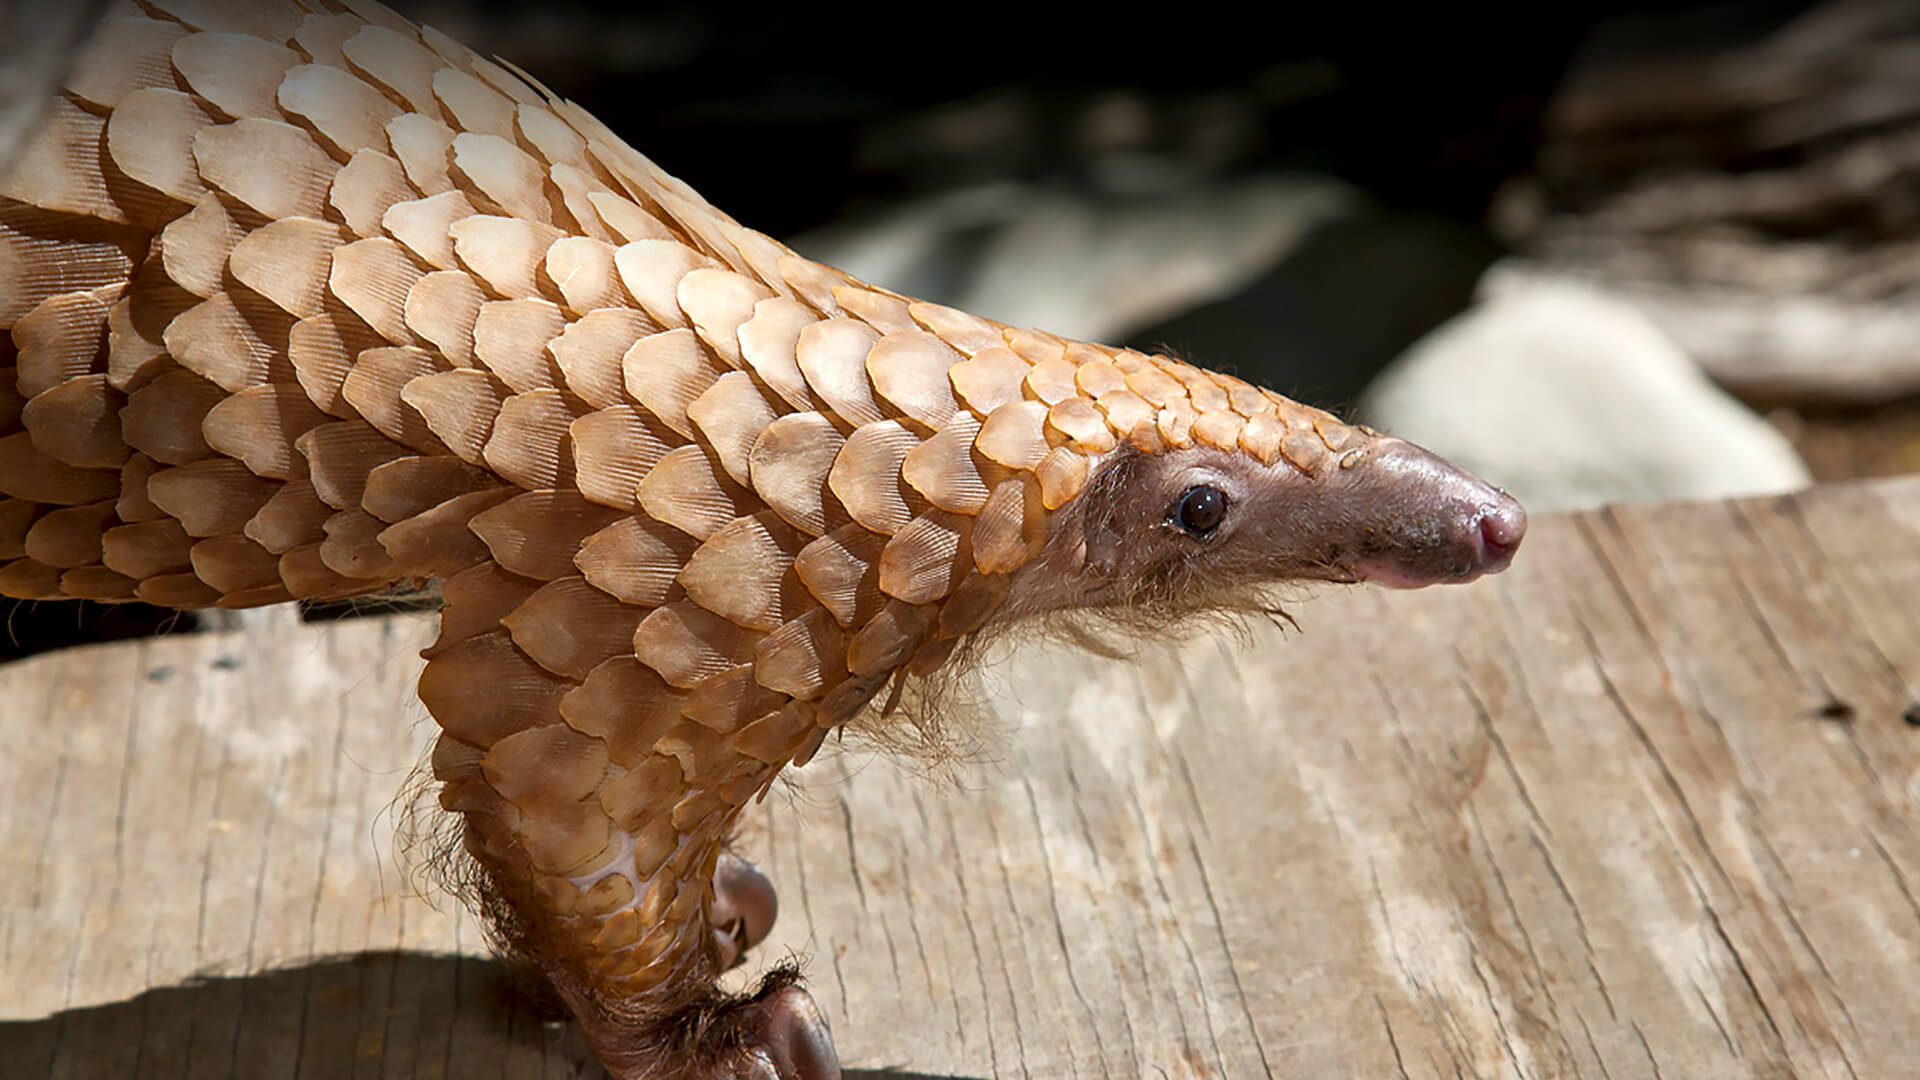 A tree pangolin looks to the right while standing on a wood plank